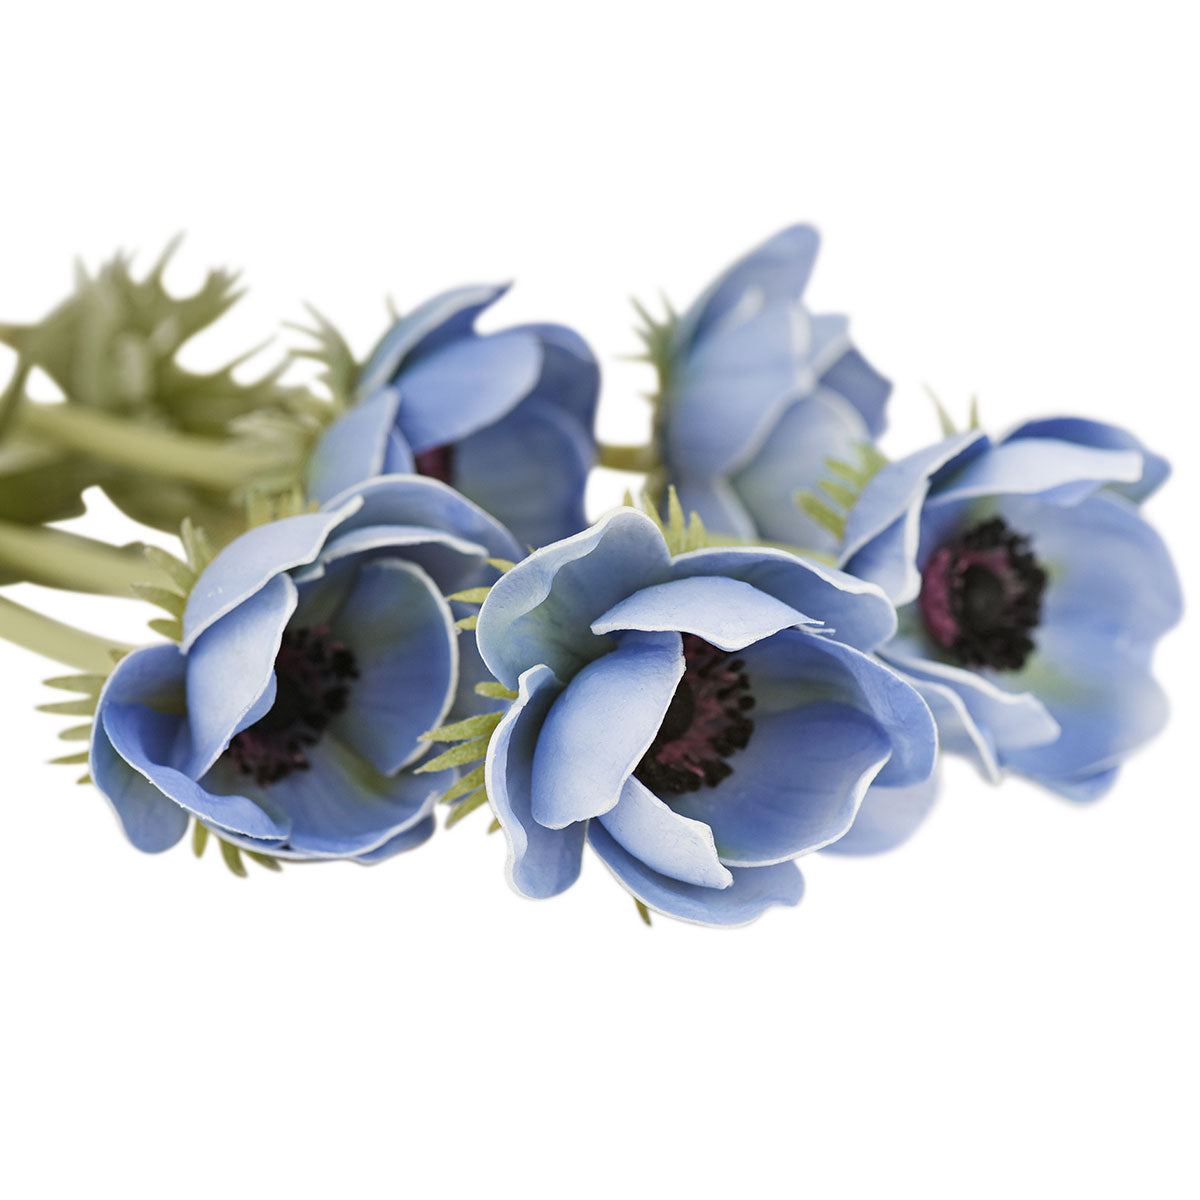 5 Long Stems (Light Blue) Anemone ‘Real Touch’ Artificial Flower